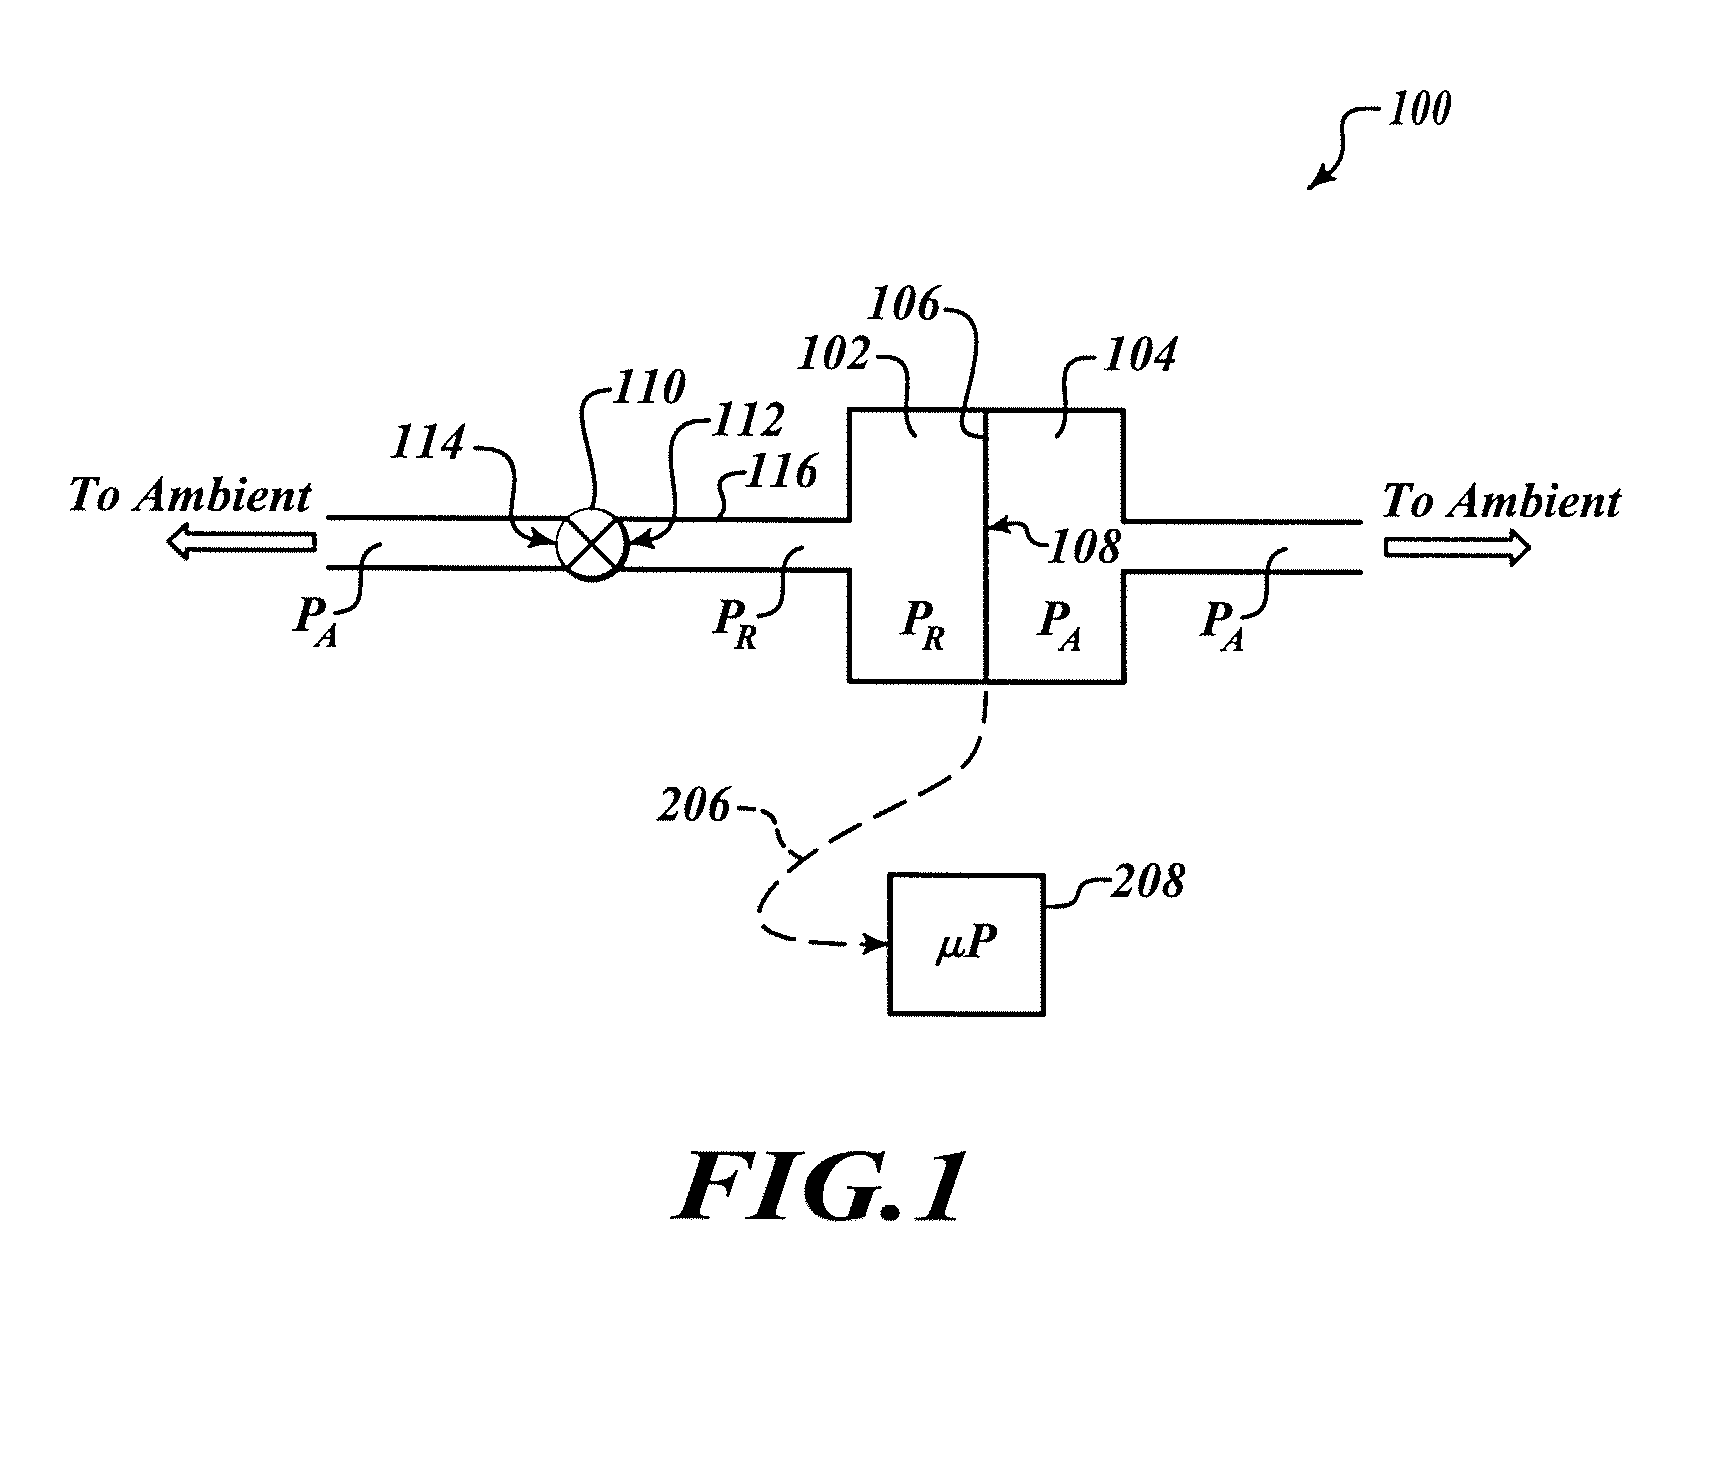 Differential pressure assemblies and methods of using same